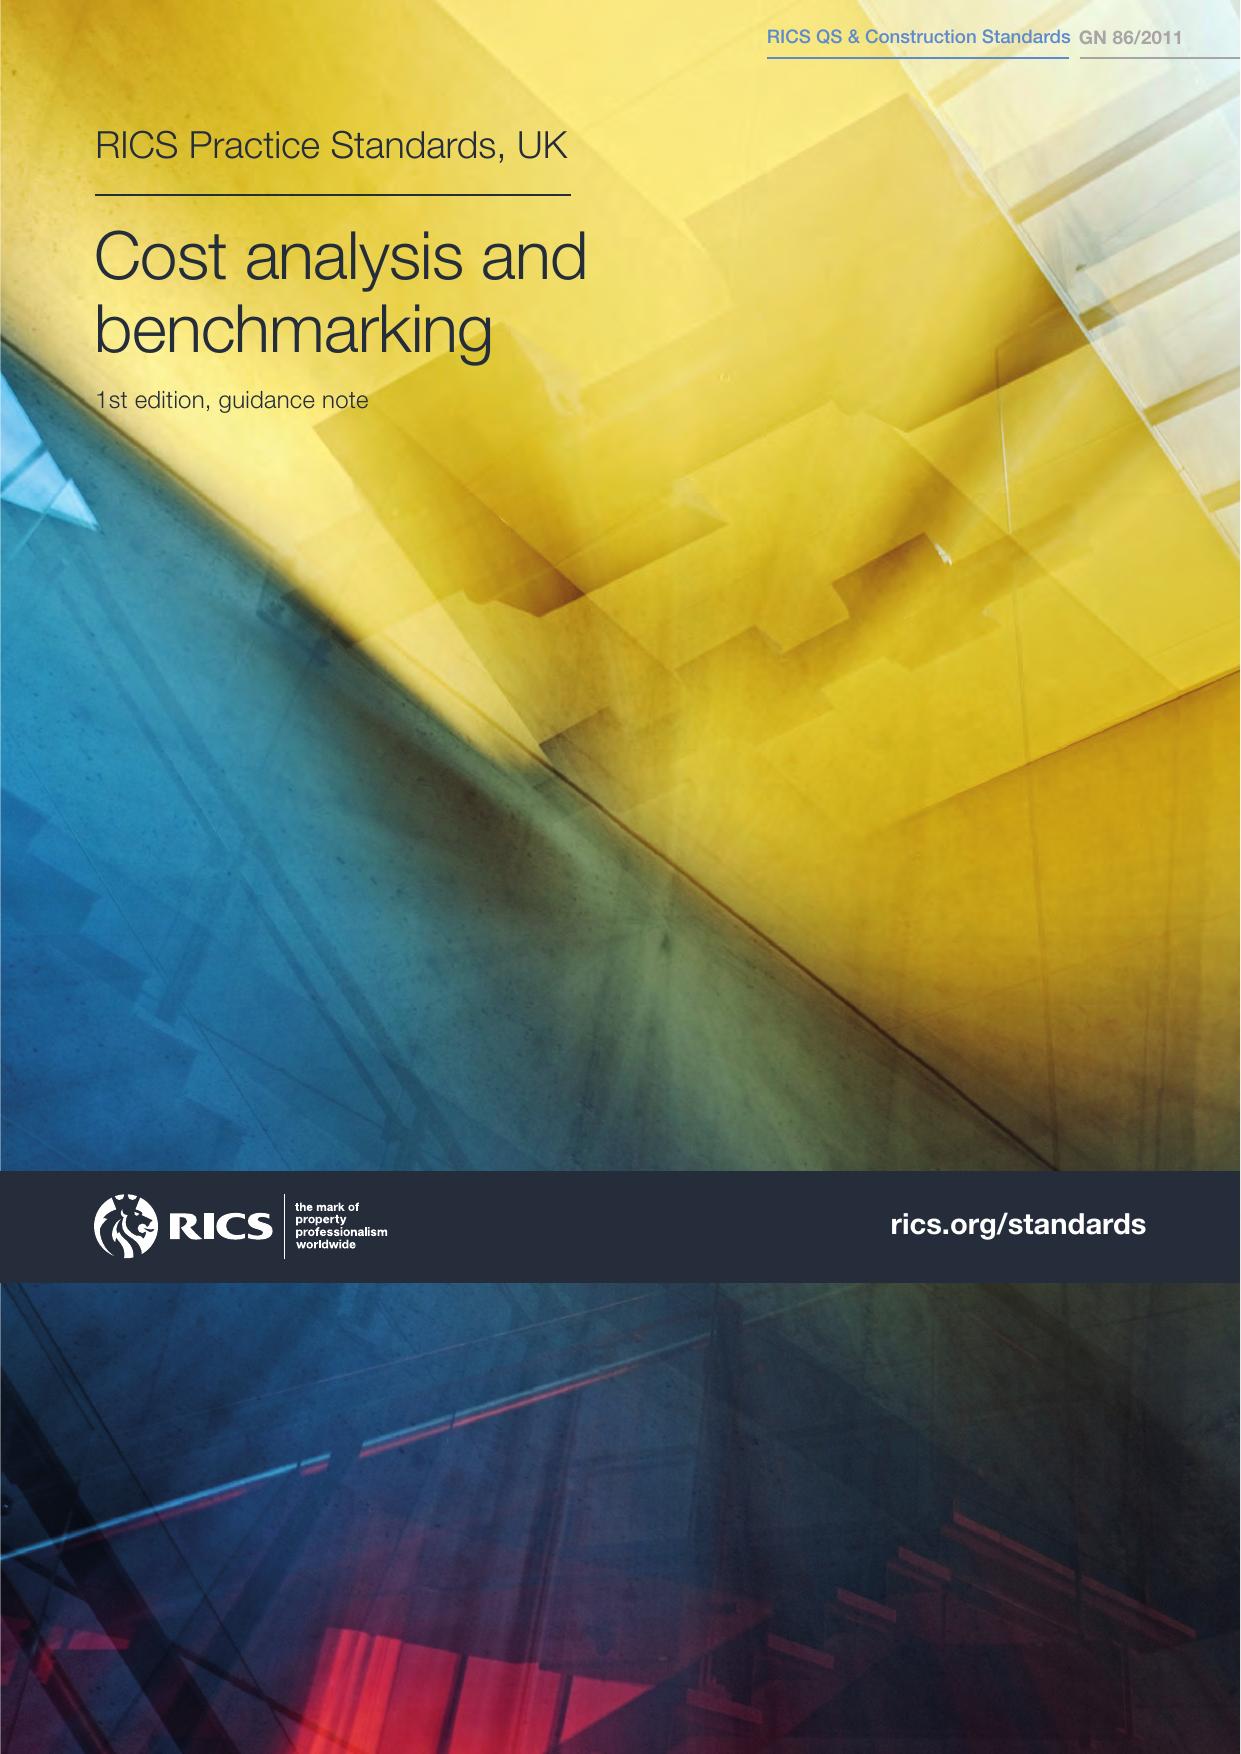 RICS Cost analysis and benchmarking 2011